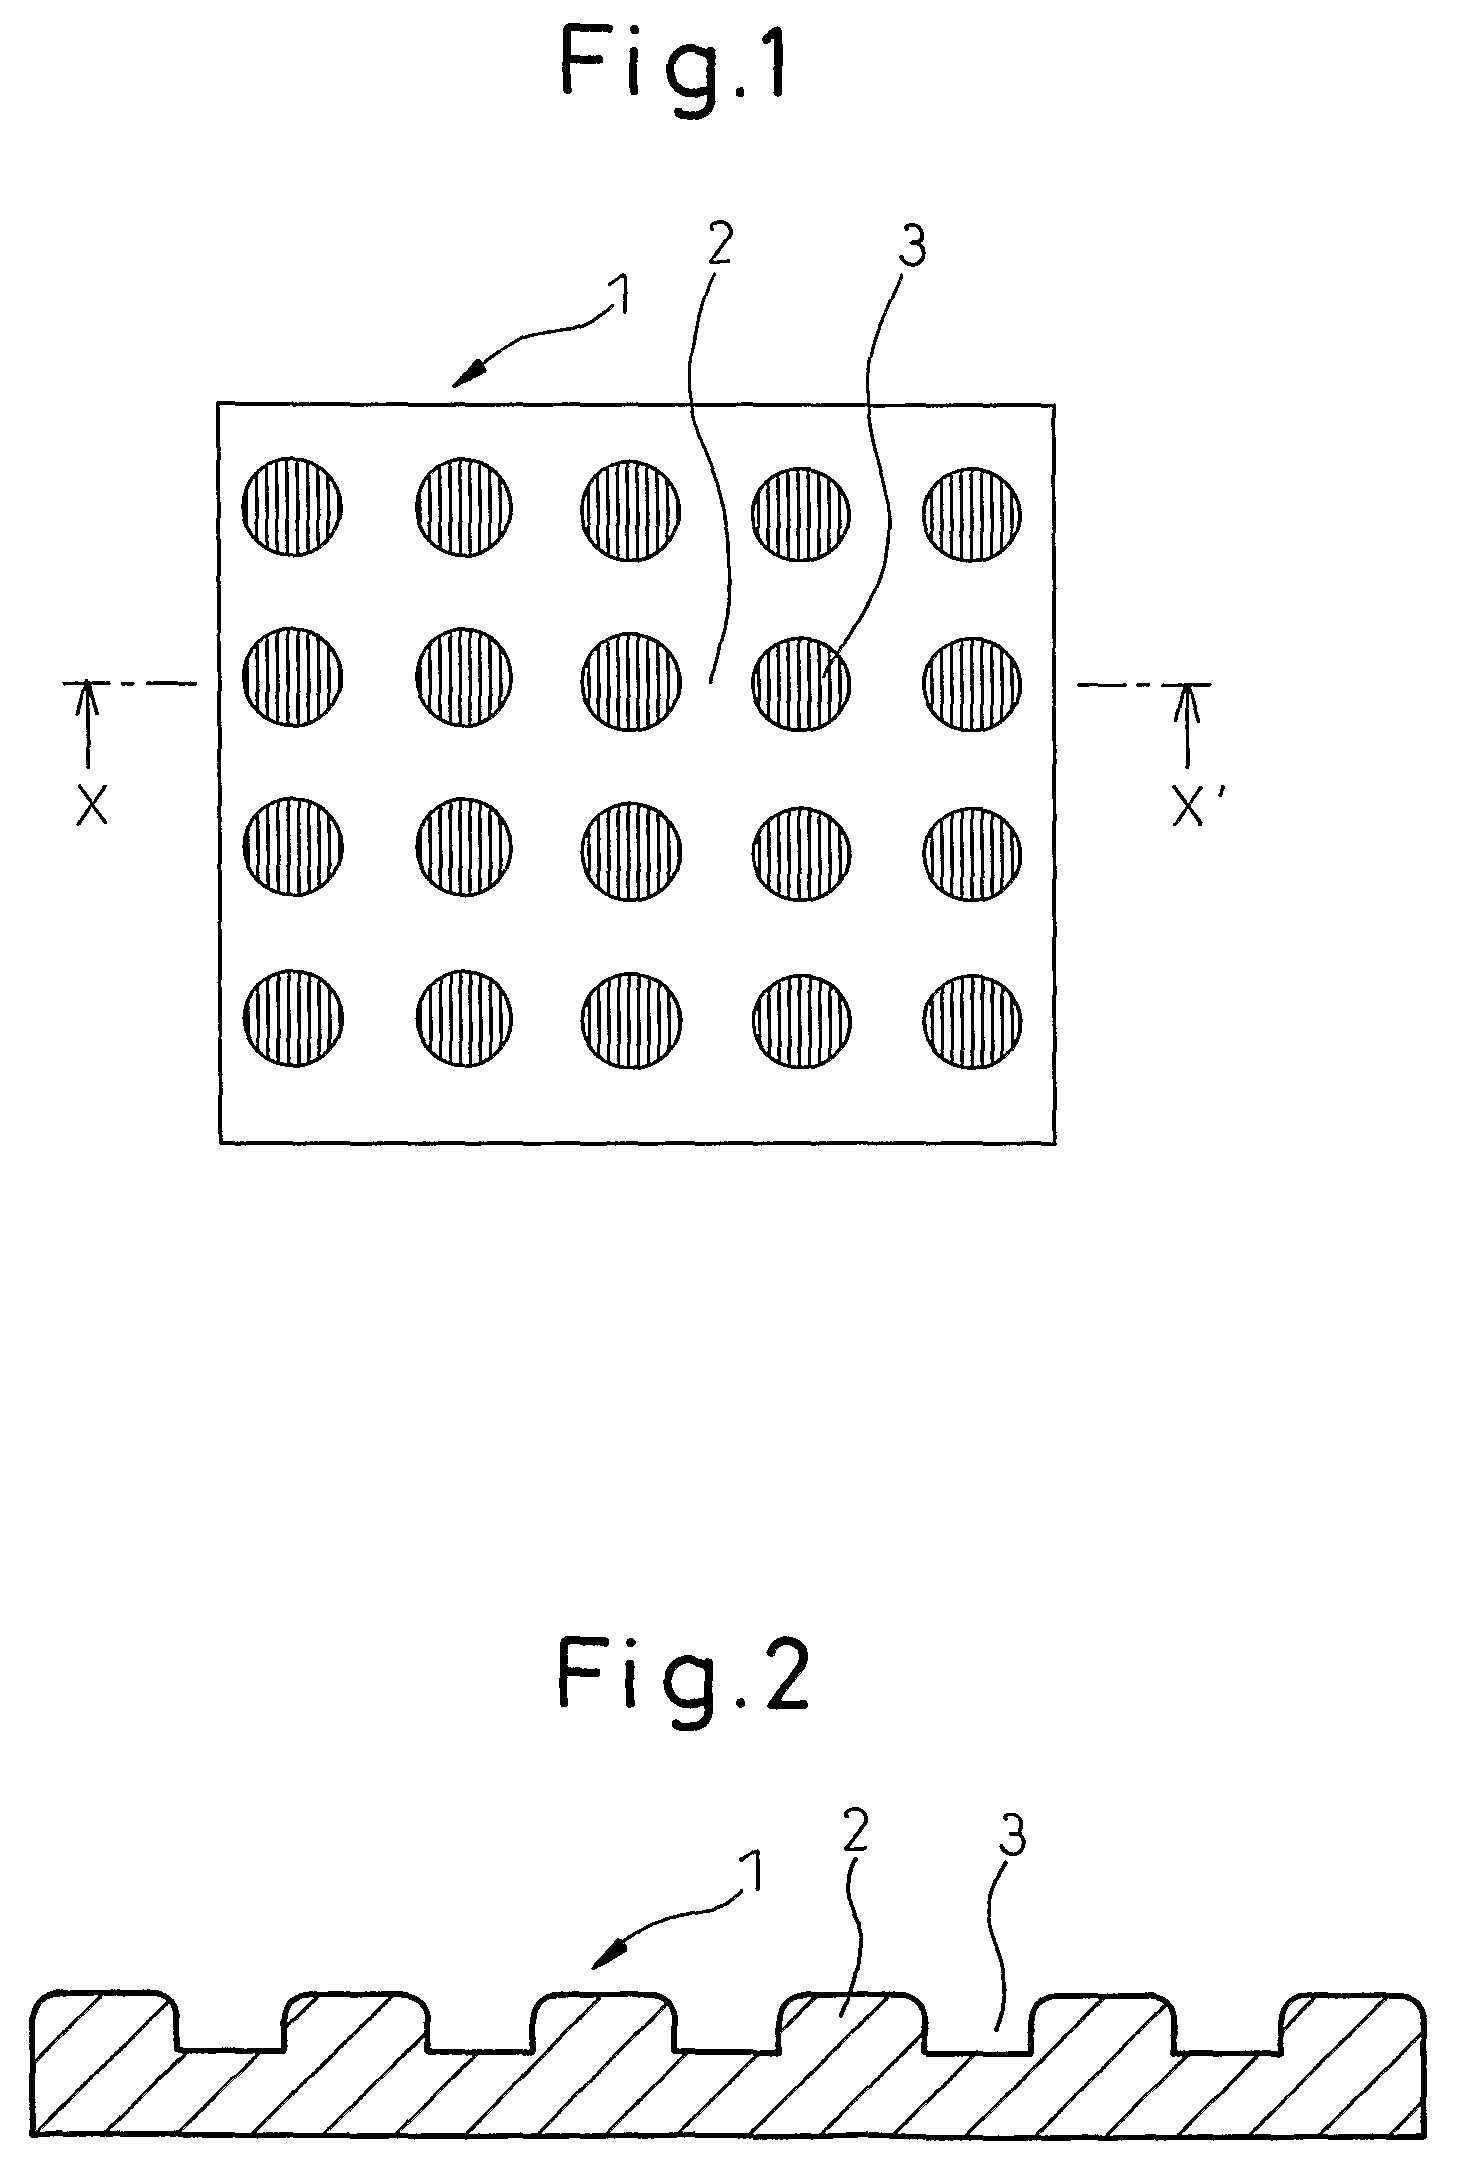 Bulky paper with concavo-convex pattern and process for producing thereof